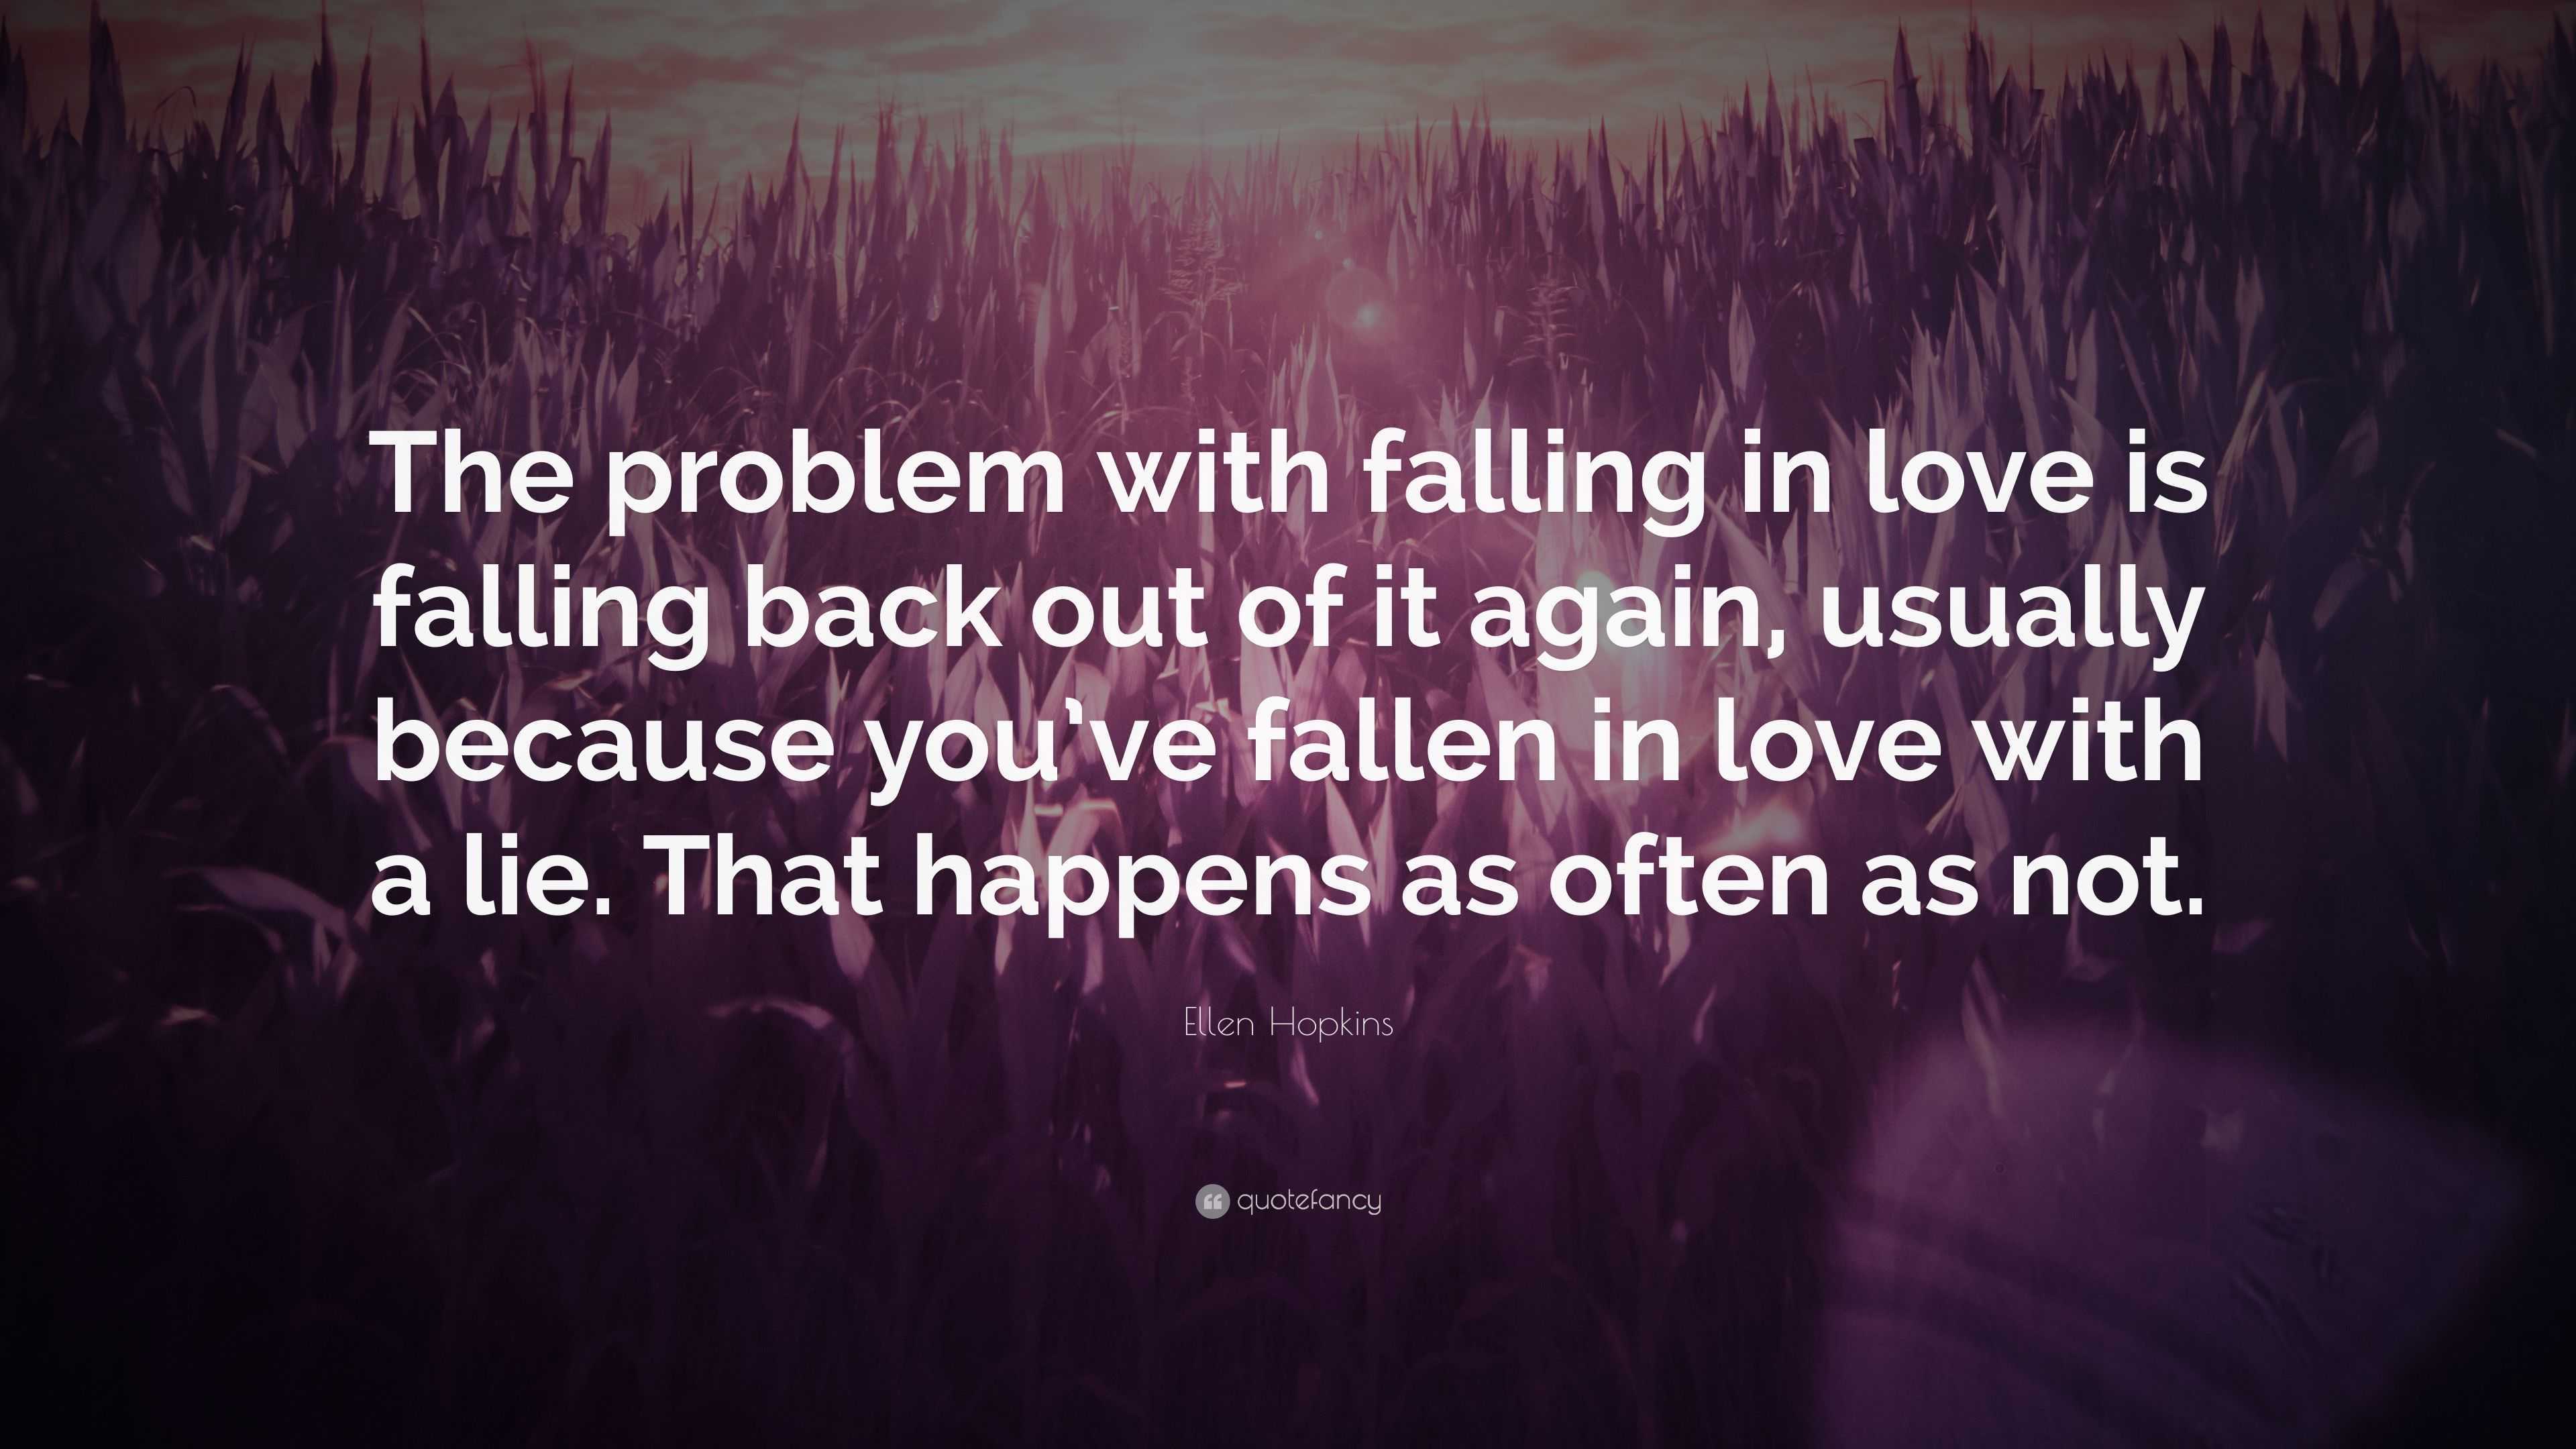 Luxury Falling Back In Love Quotes | Thousands of Inspiration Quotes